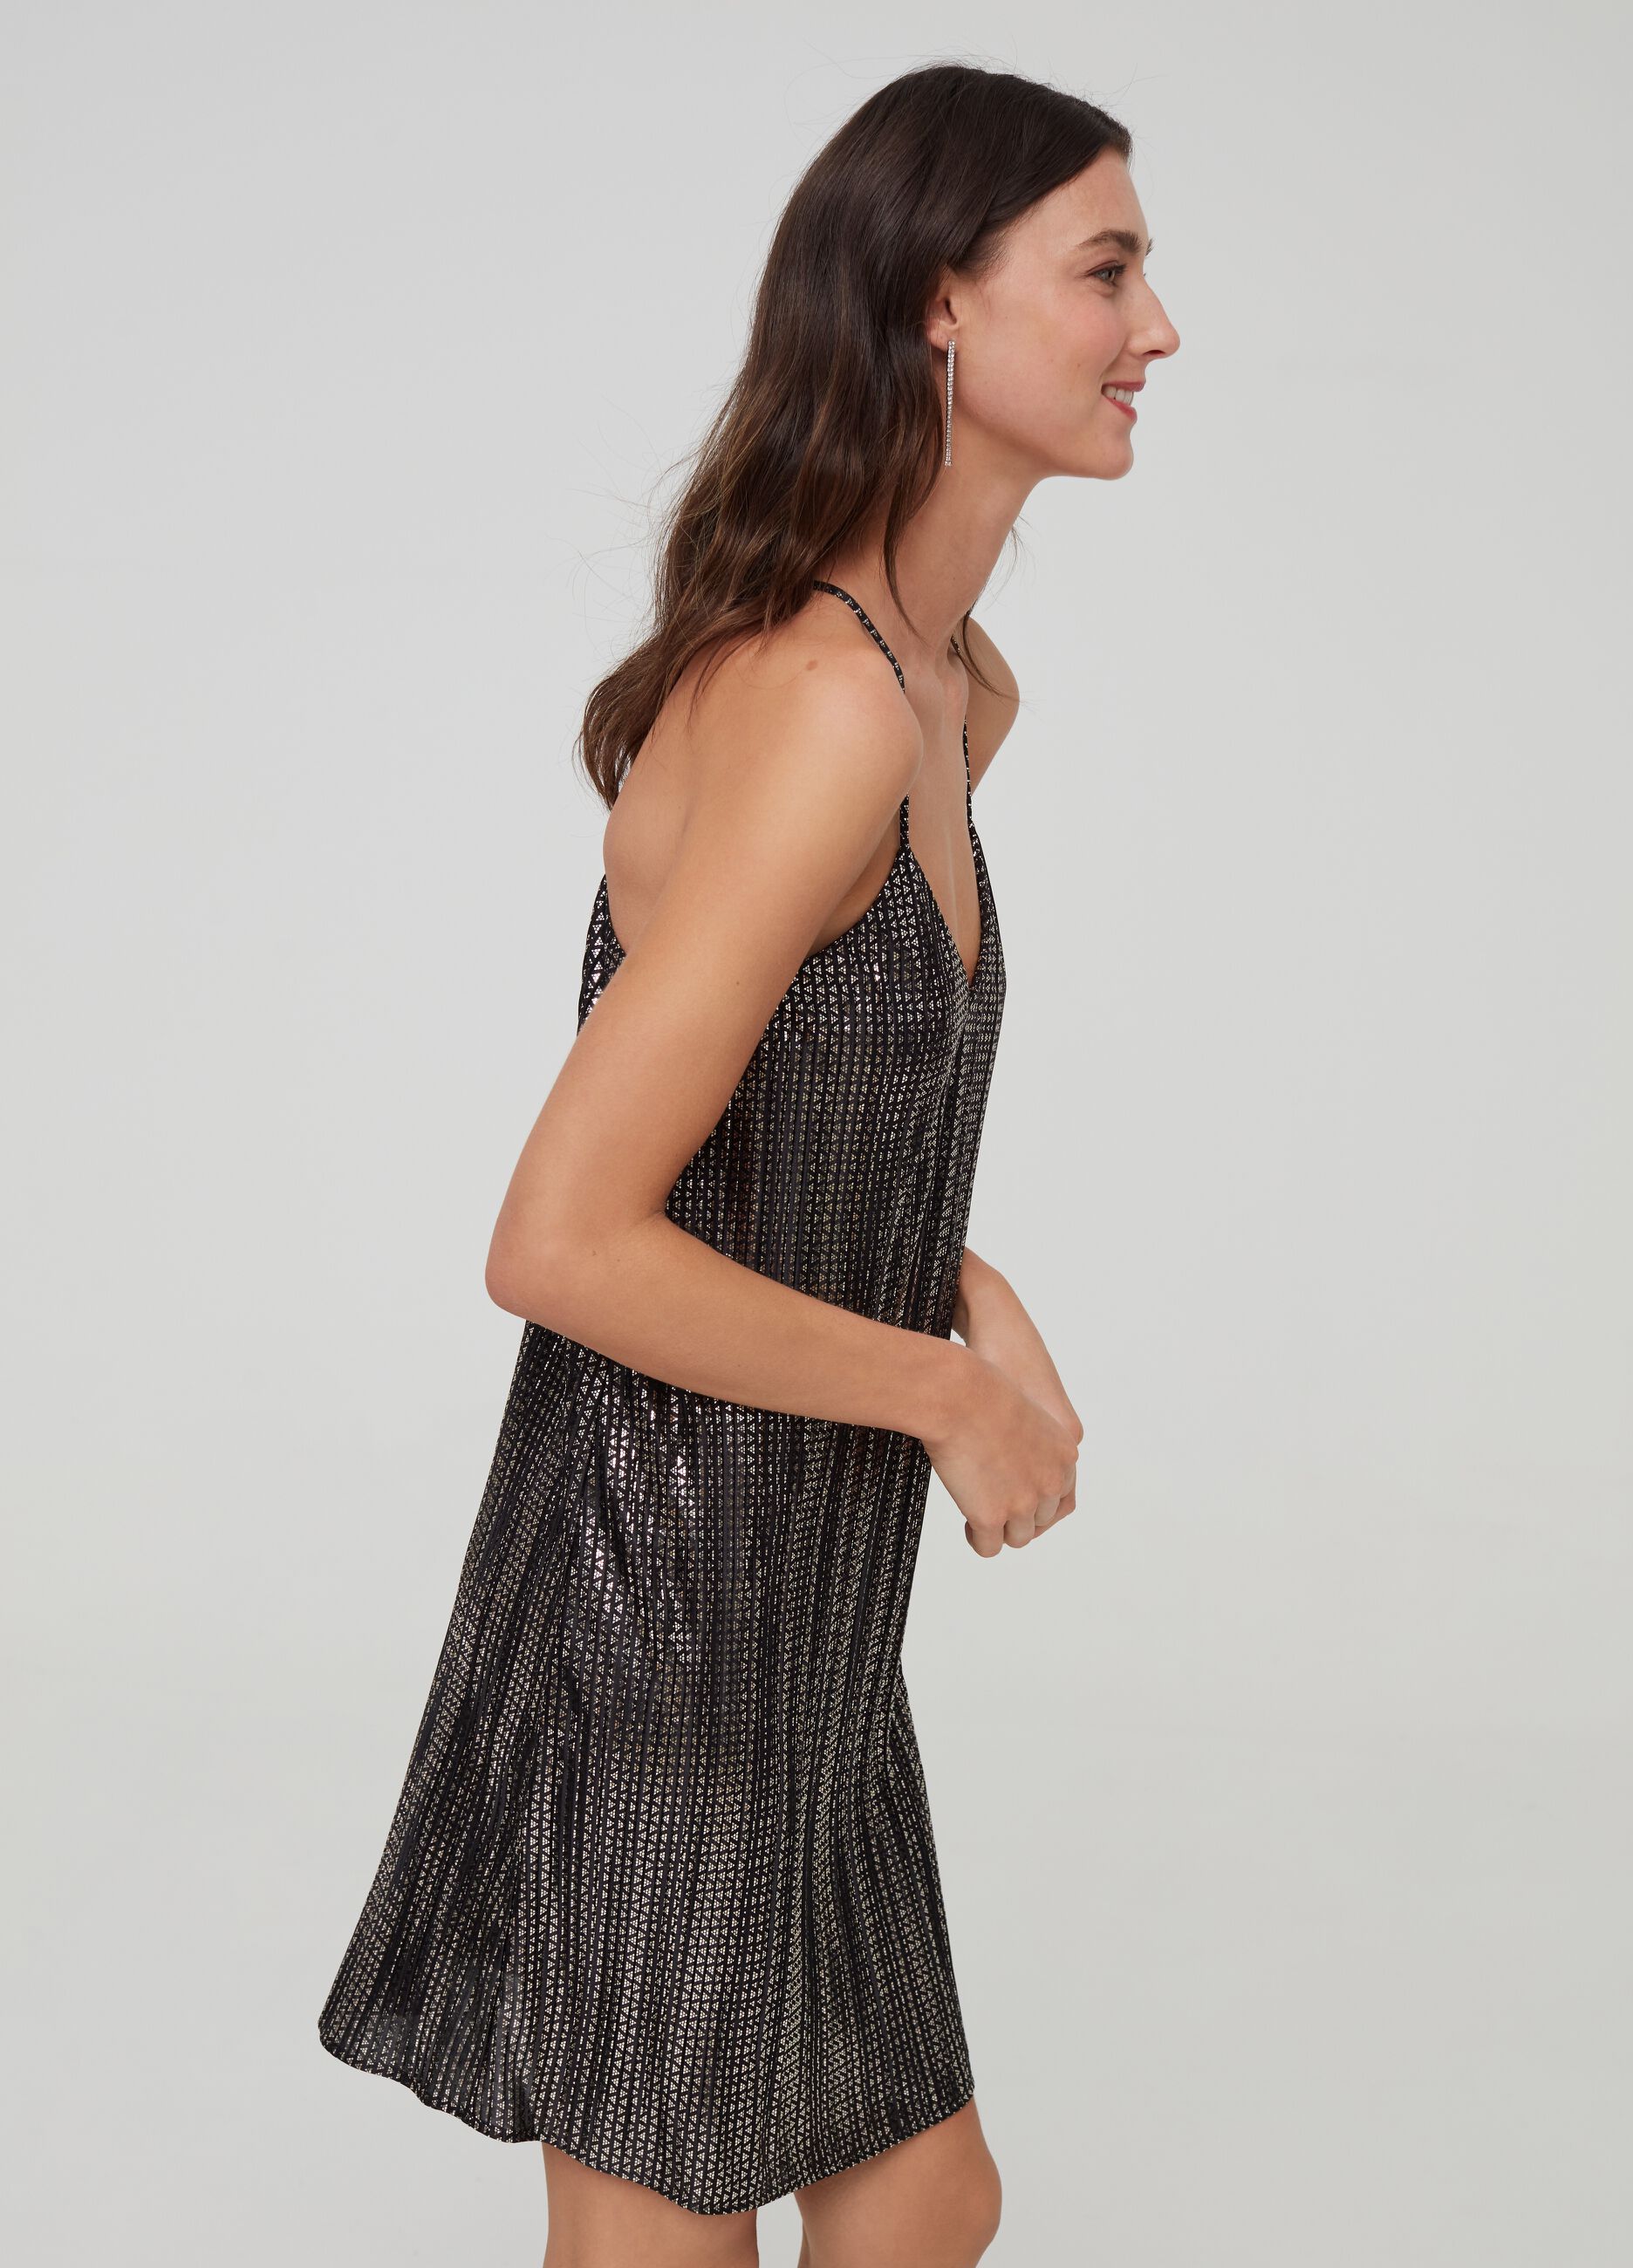 Dress with lamé triangles pattern